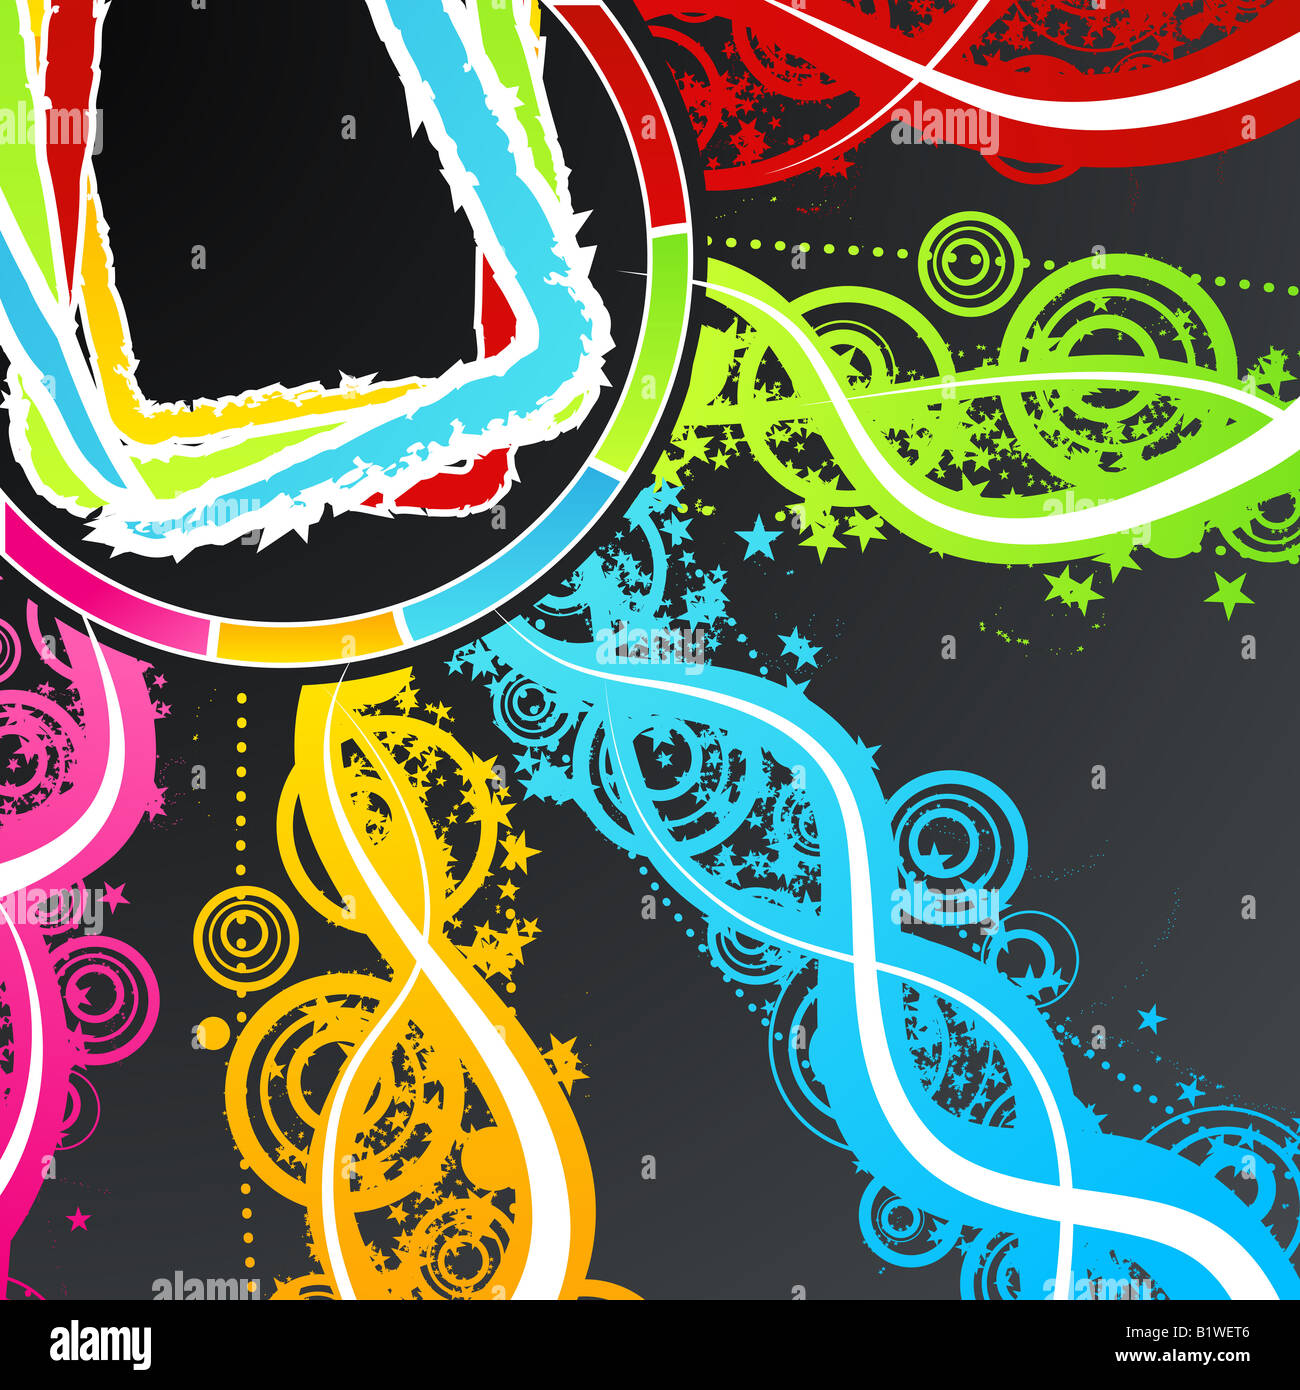 Vector illustration of a celebration background with colorful explosions of rainbow stars circles and lined art Stock Photo